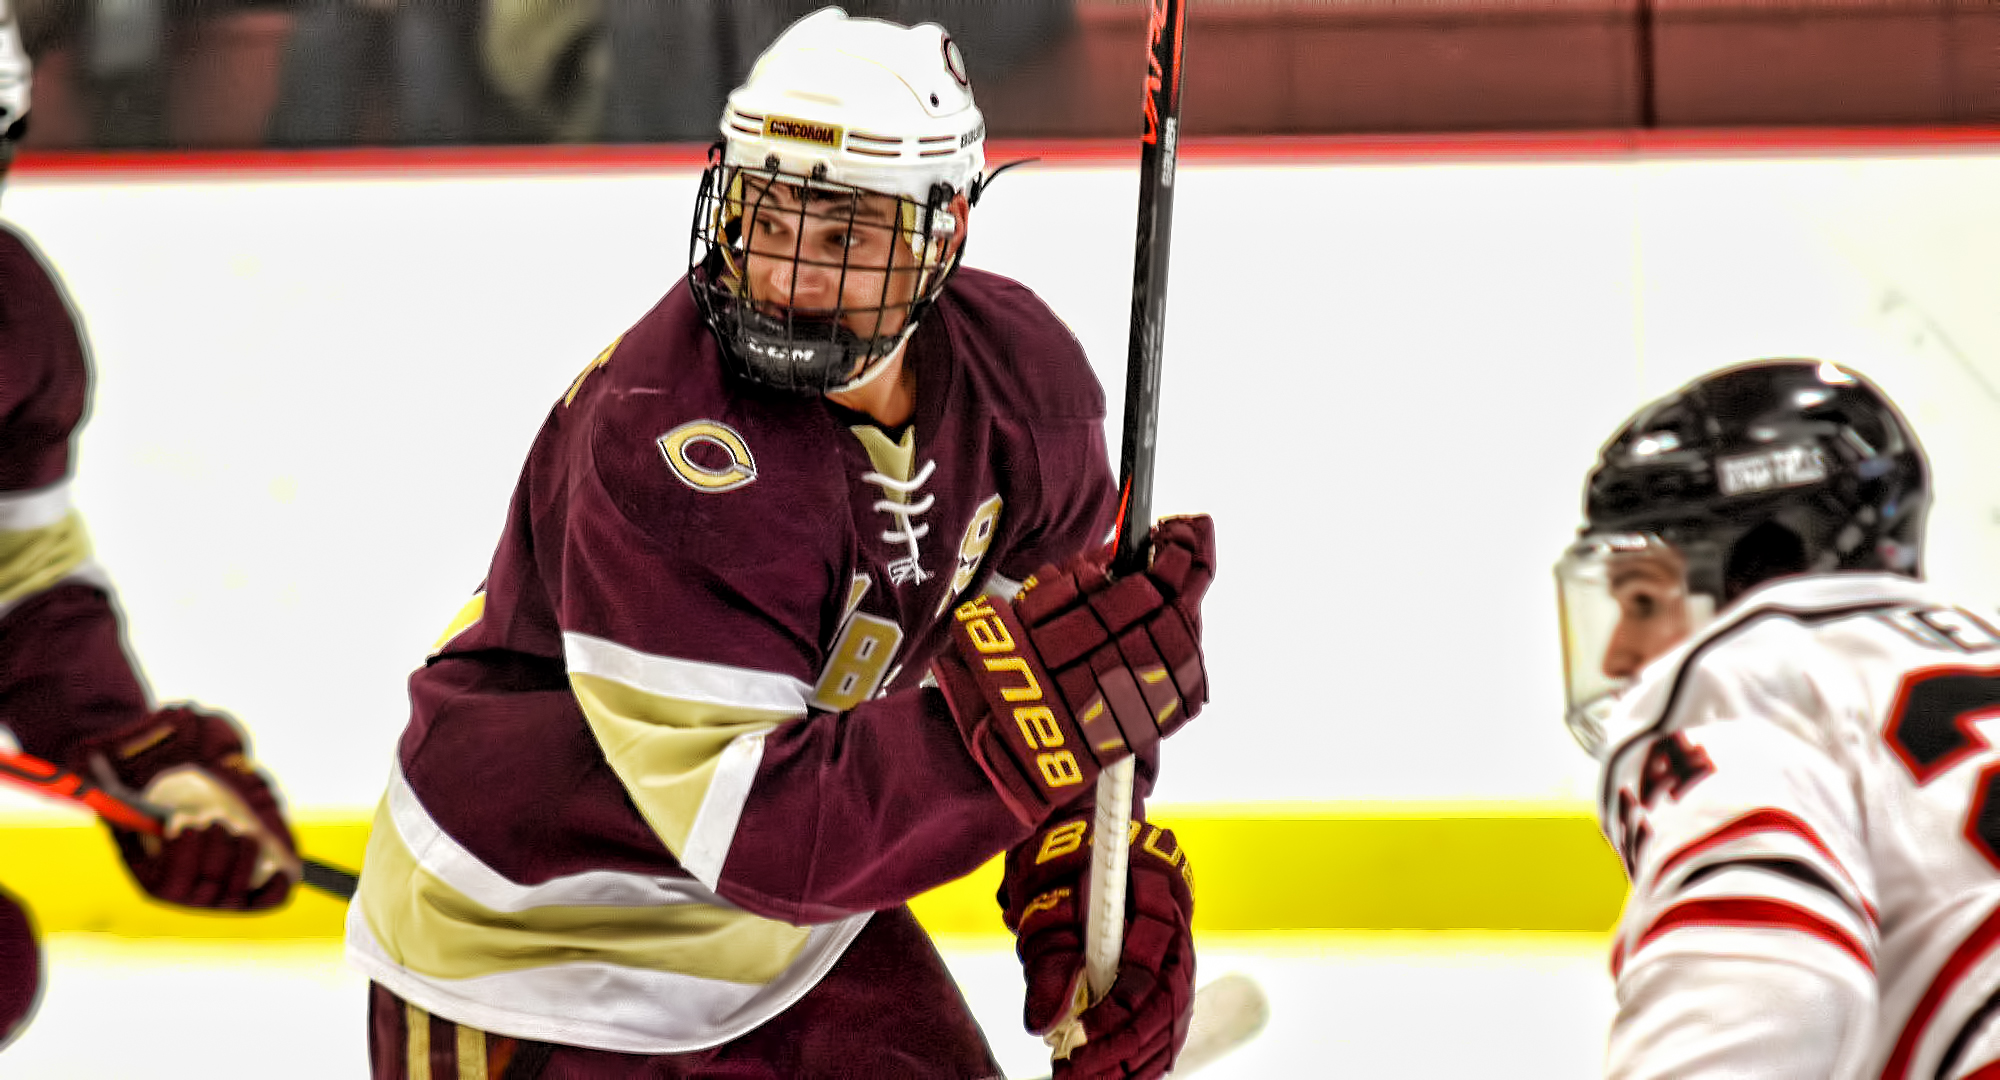 Junior Tyler Bossert scored a shorthanded goal in the second period in the Cobbers' series finale at Wis.-River Falls.